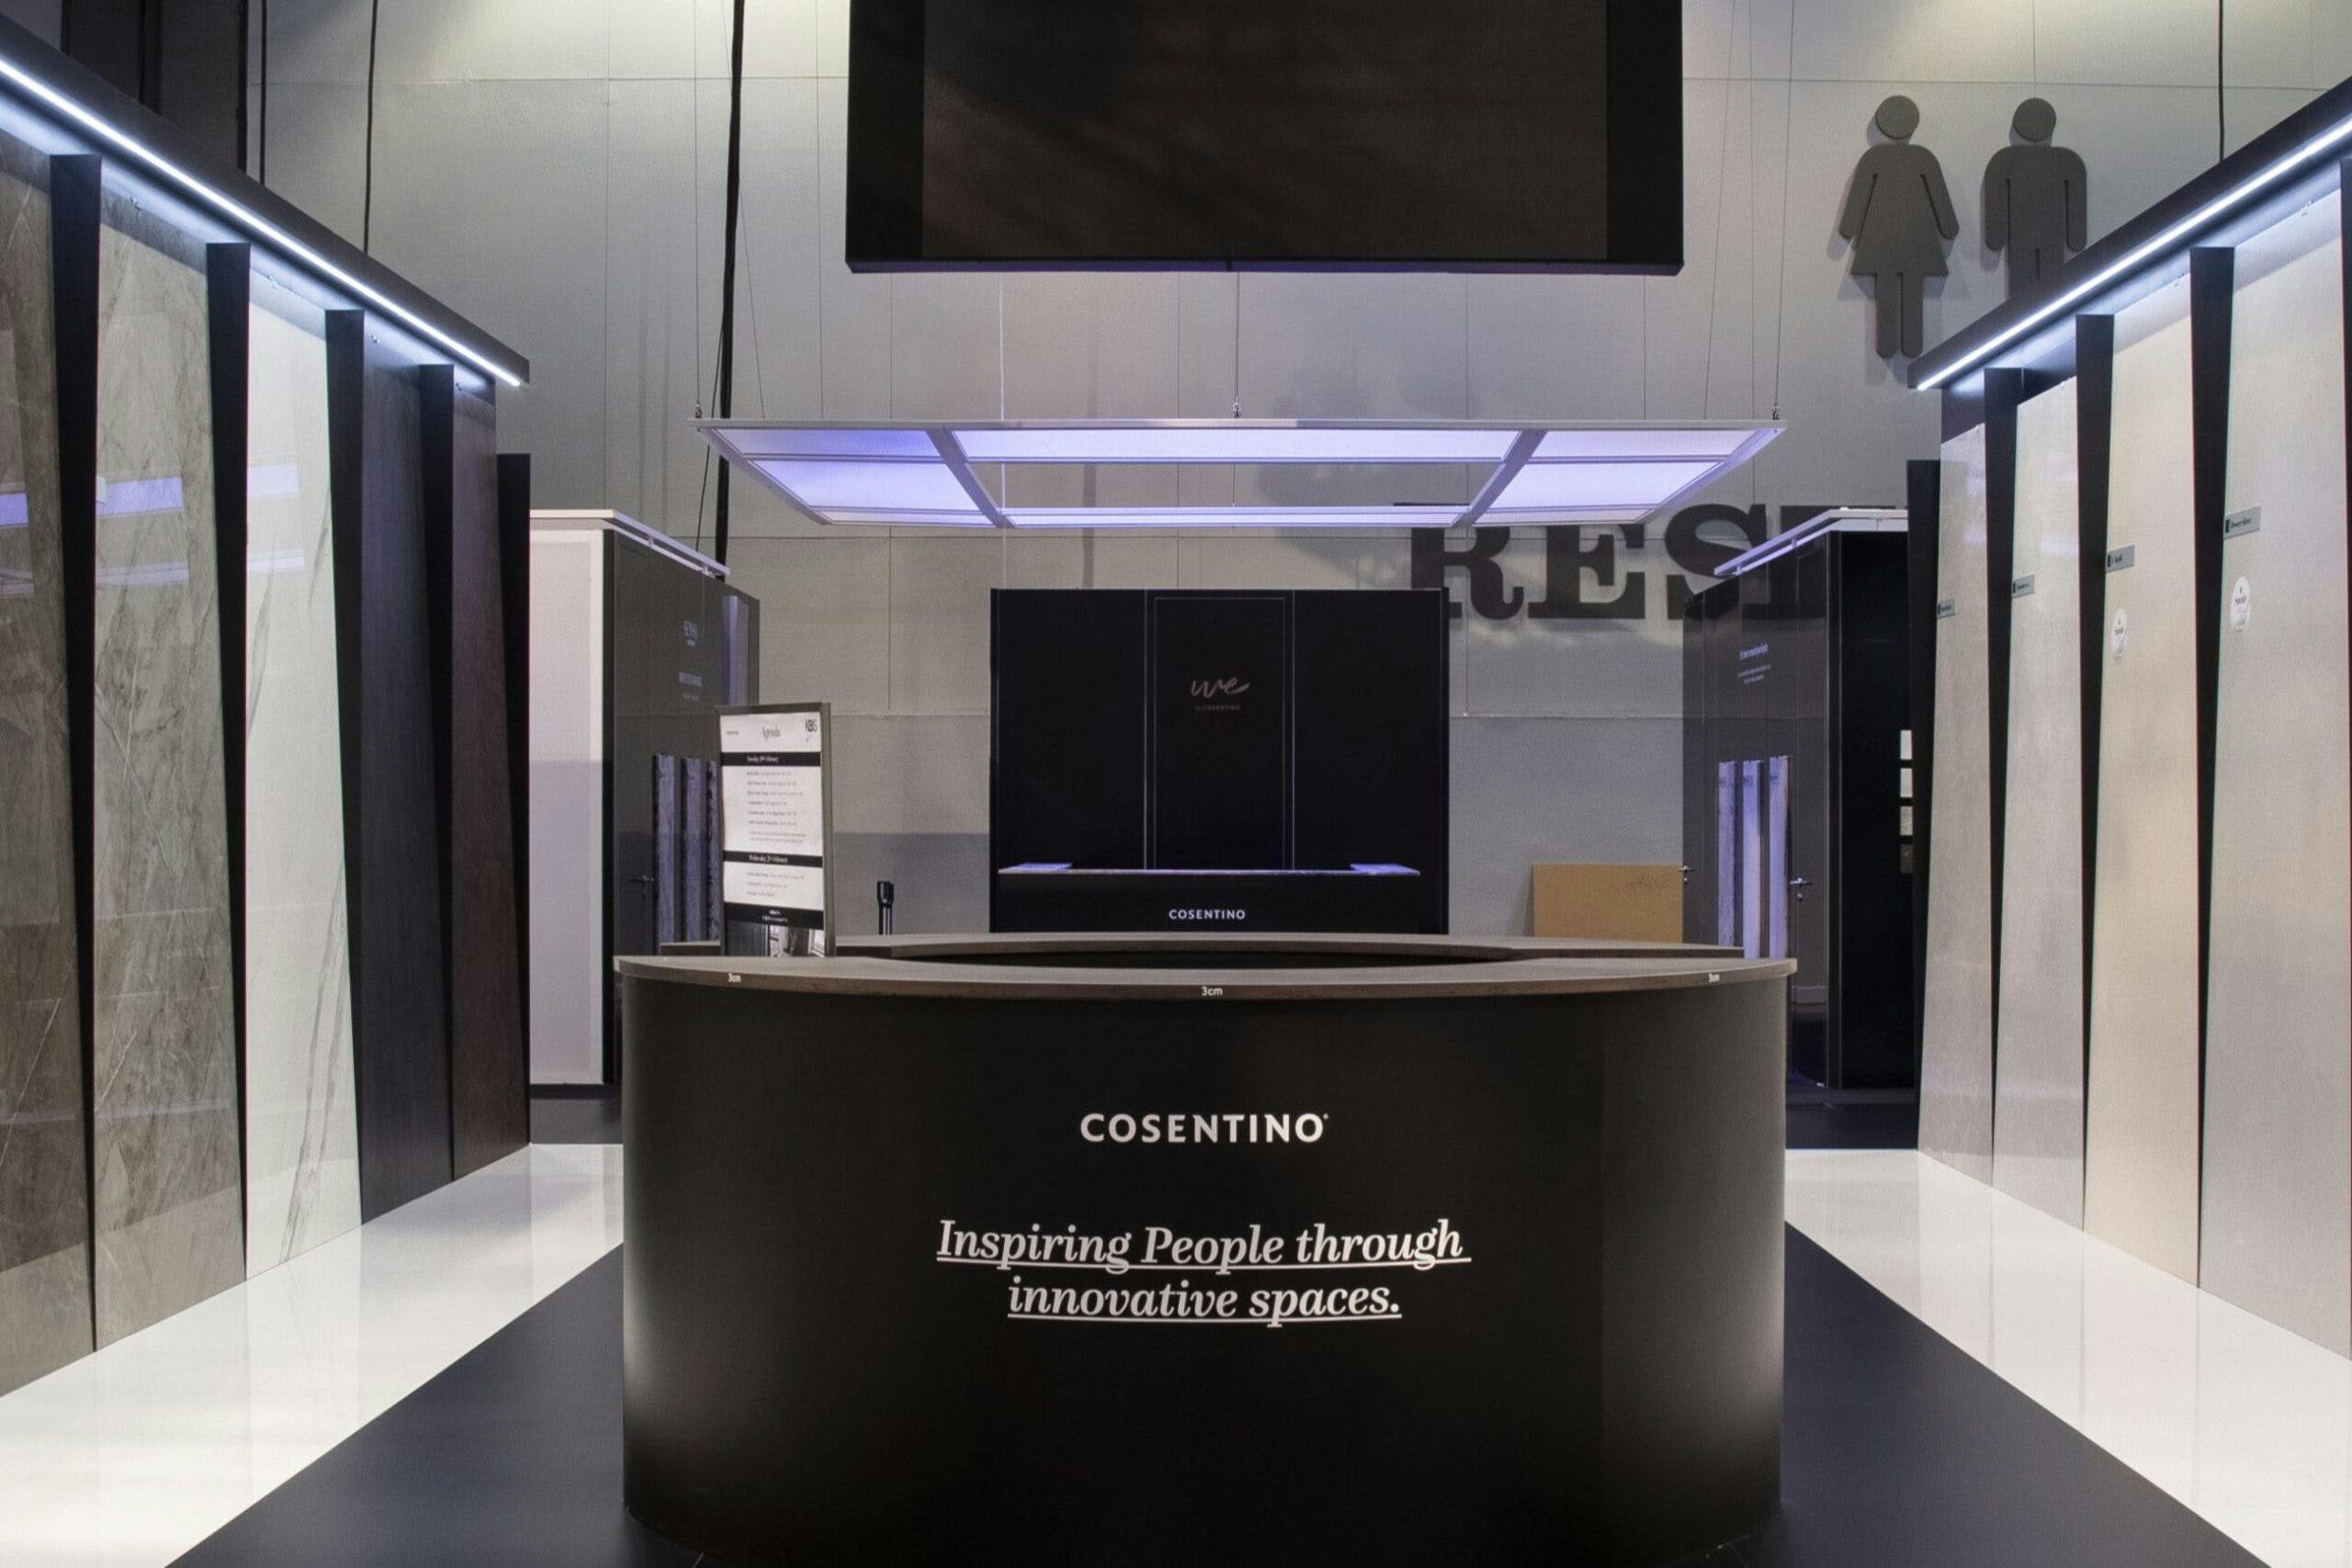 Image 33 of Stand Cosentino en KBIS 2019 baja 1 scaled in Cosentino at KBIS 2019 - Cosentino